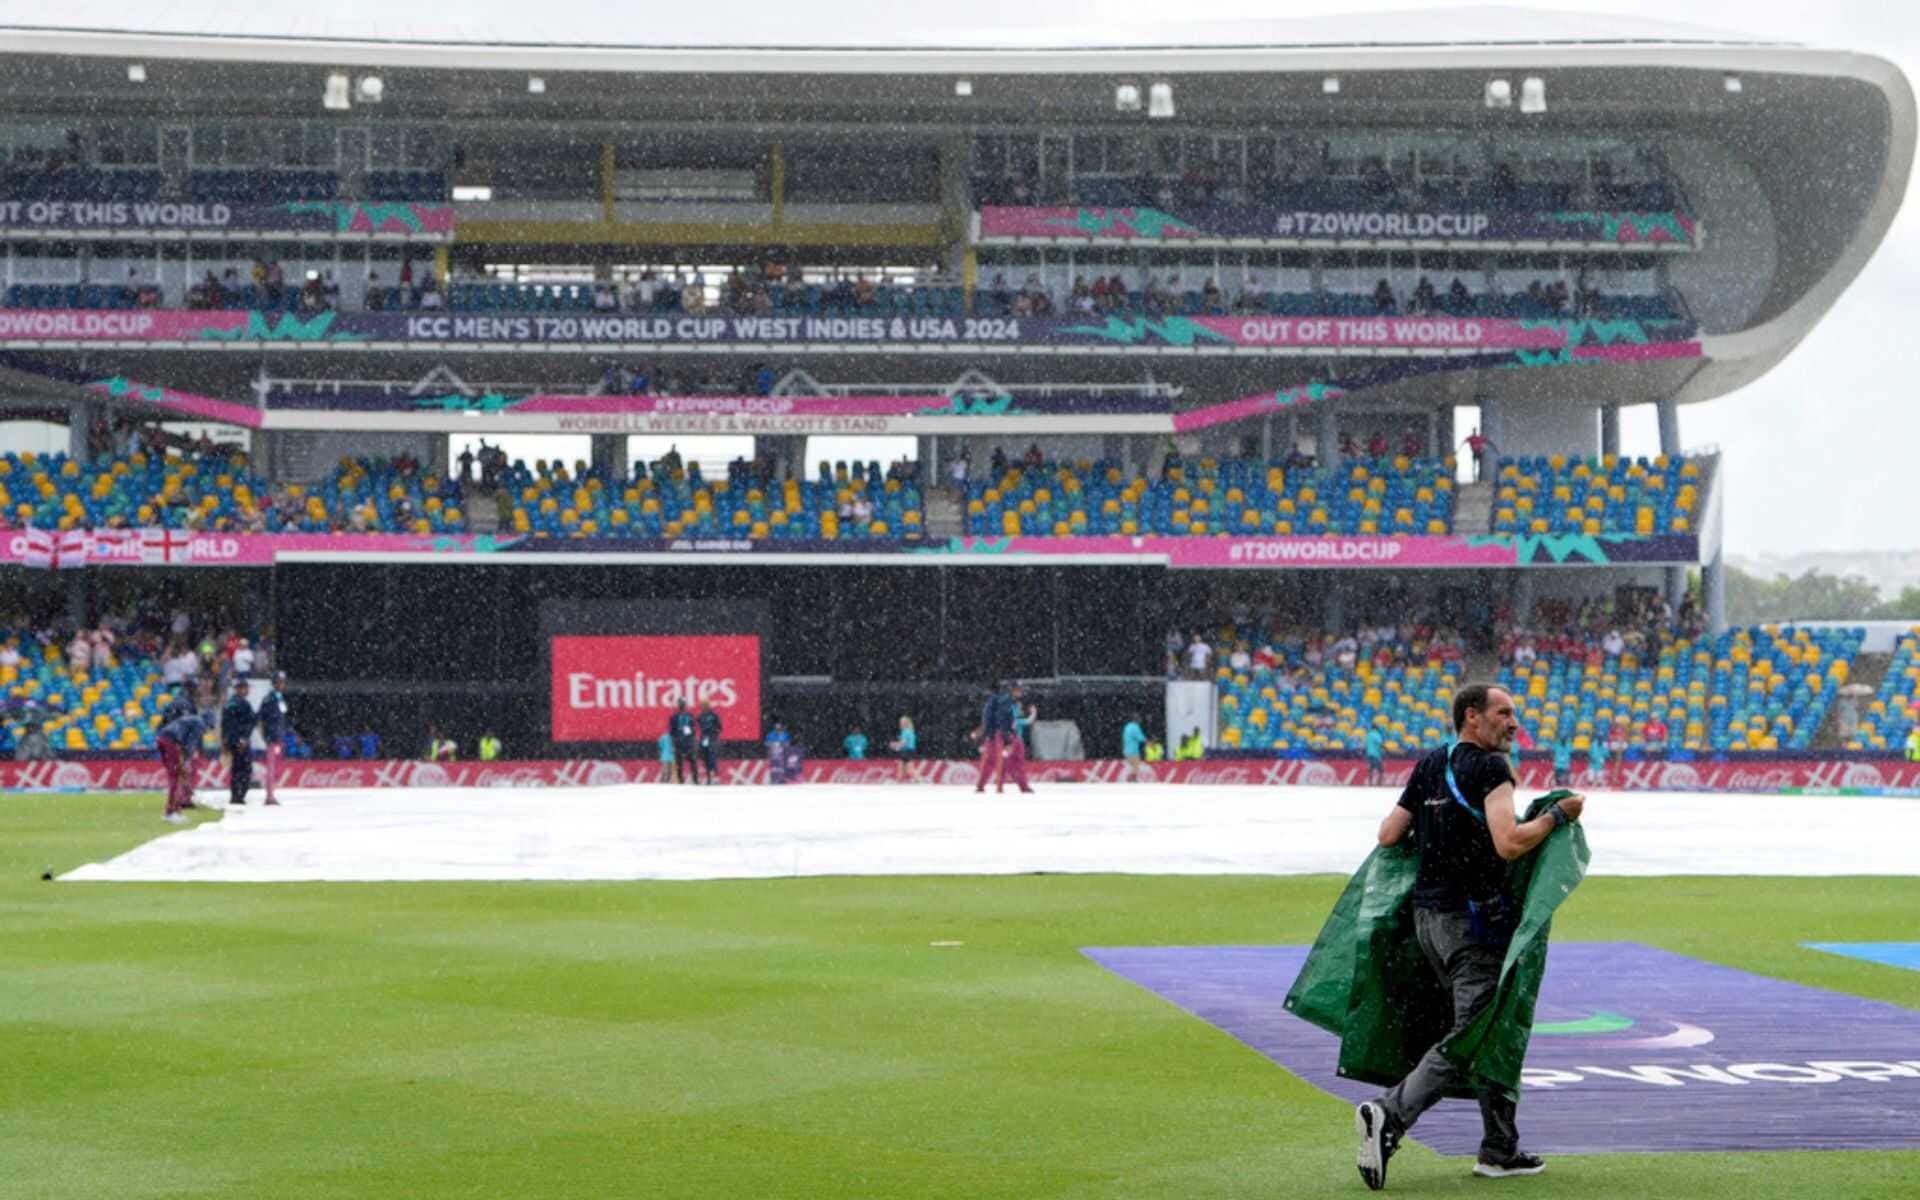 Groundsmen at work as rain stops play in ENG vs SCO after 6.2 overs (AP)